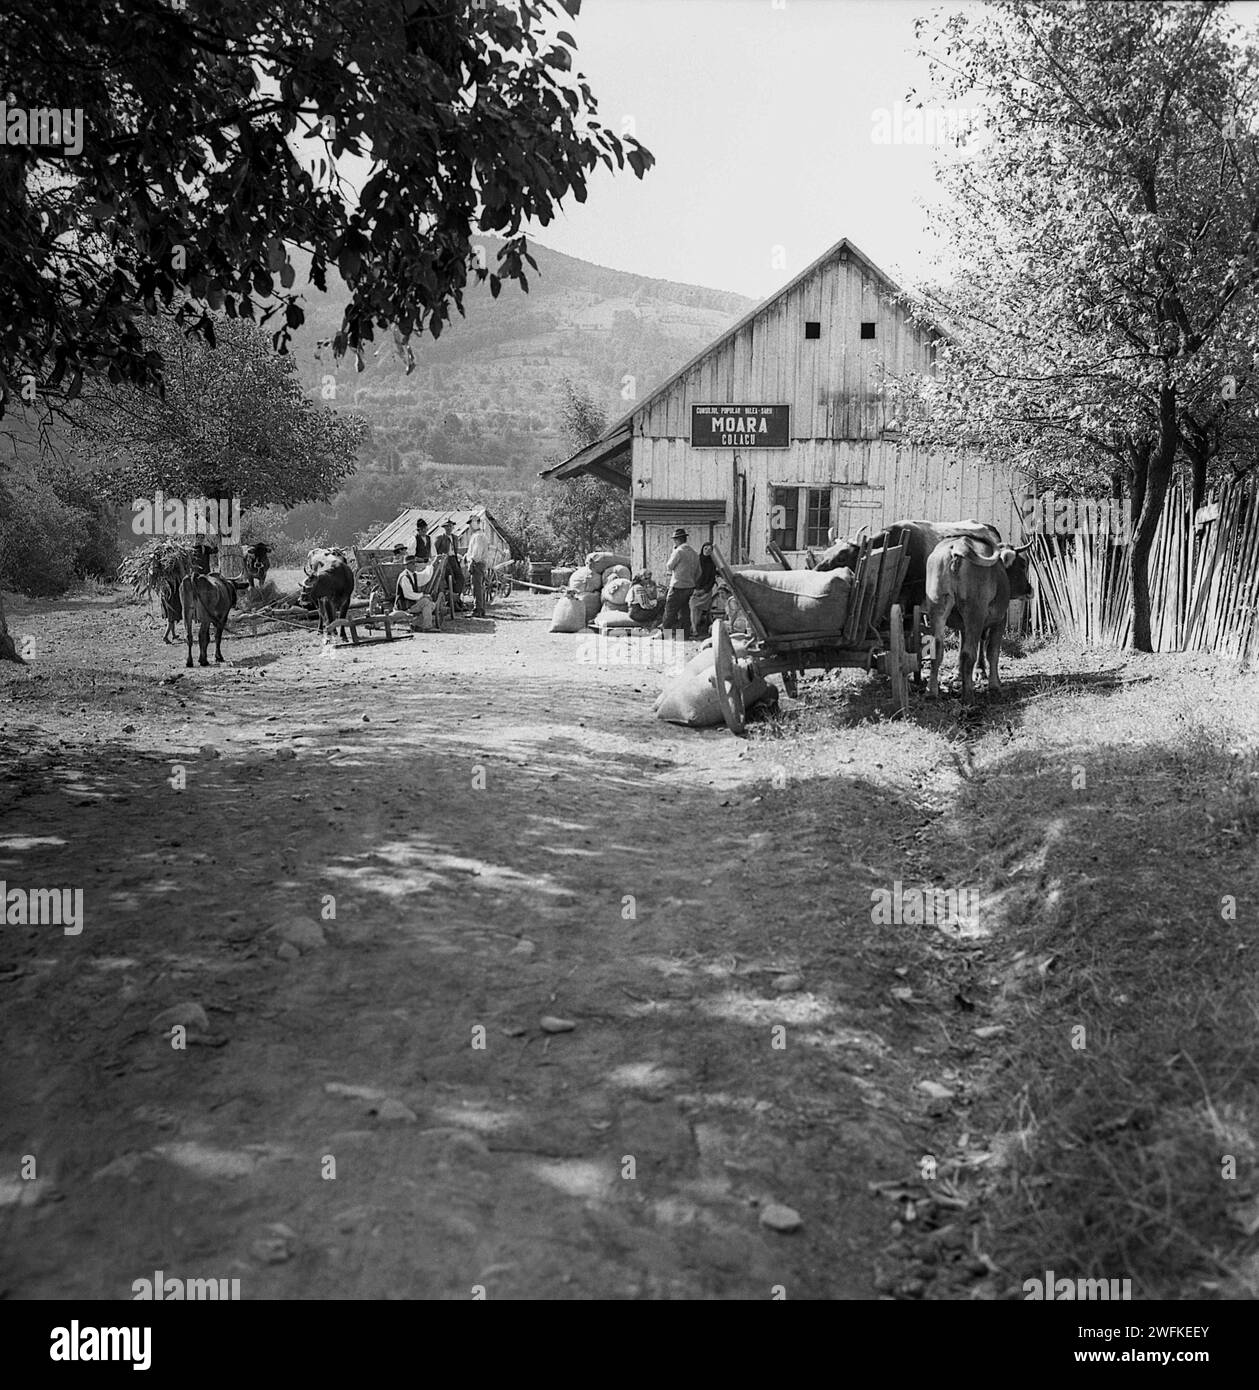 Vrancea County, Socialist Republic of Romania, approx. 1977. Peasants waiting outside a mill house for their turn to have the grains milled. Stock Photo